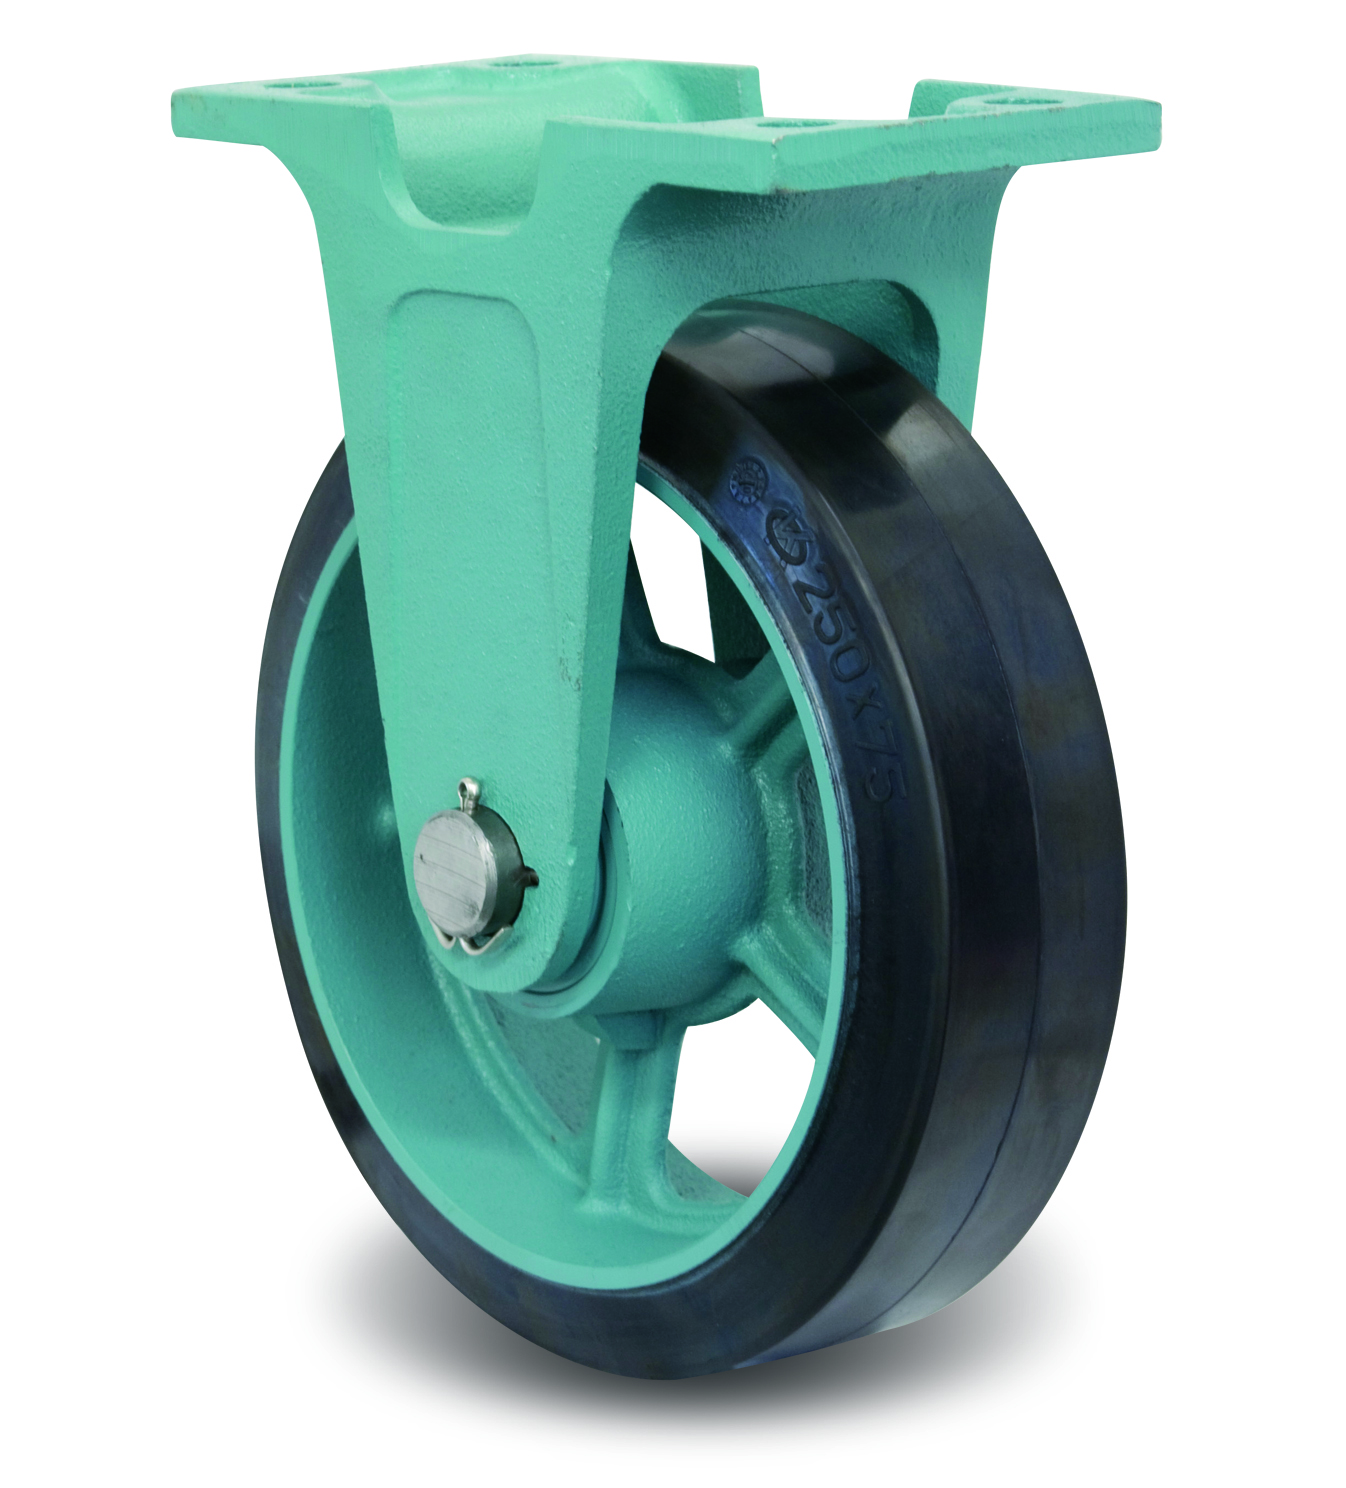 Casters - Wide Type Ductile Steel Fixed Plate Rubber, MG-W, E/MG-W Series. EMG-W130X65